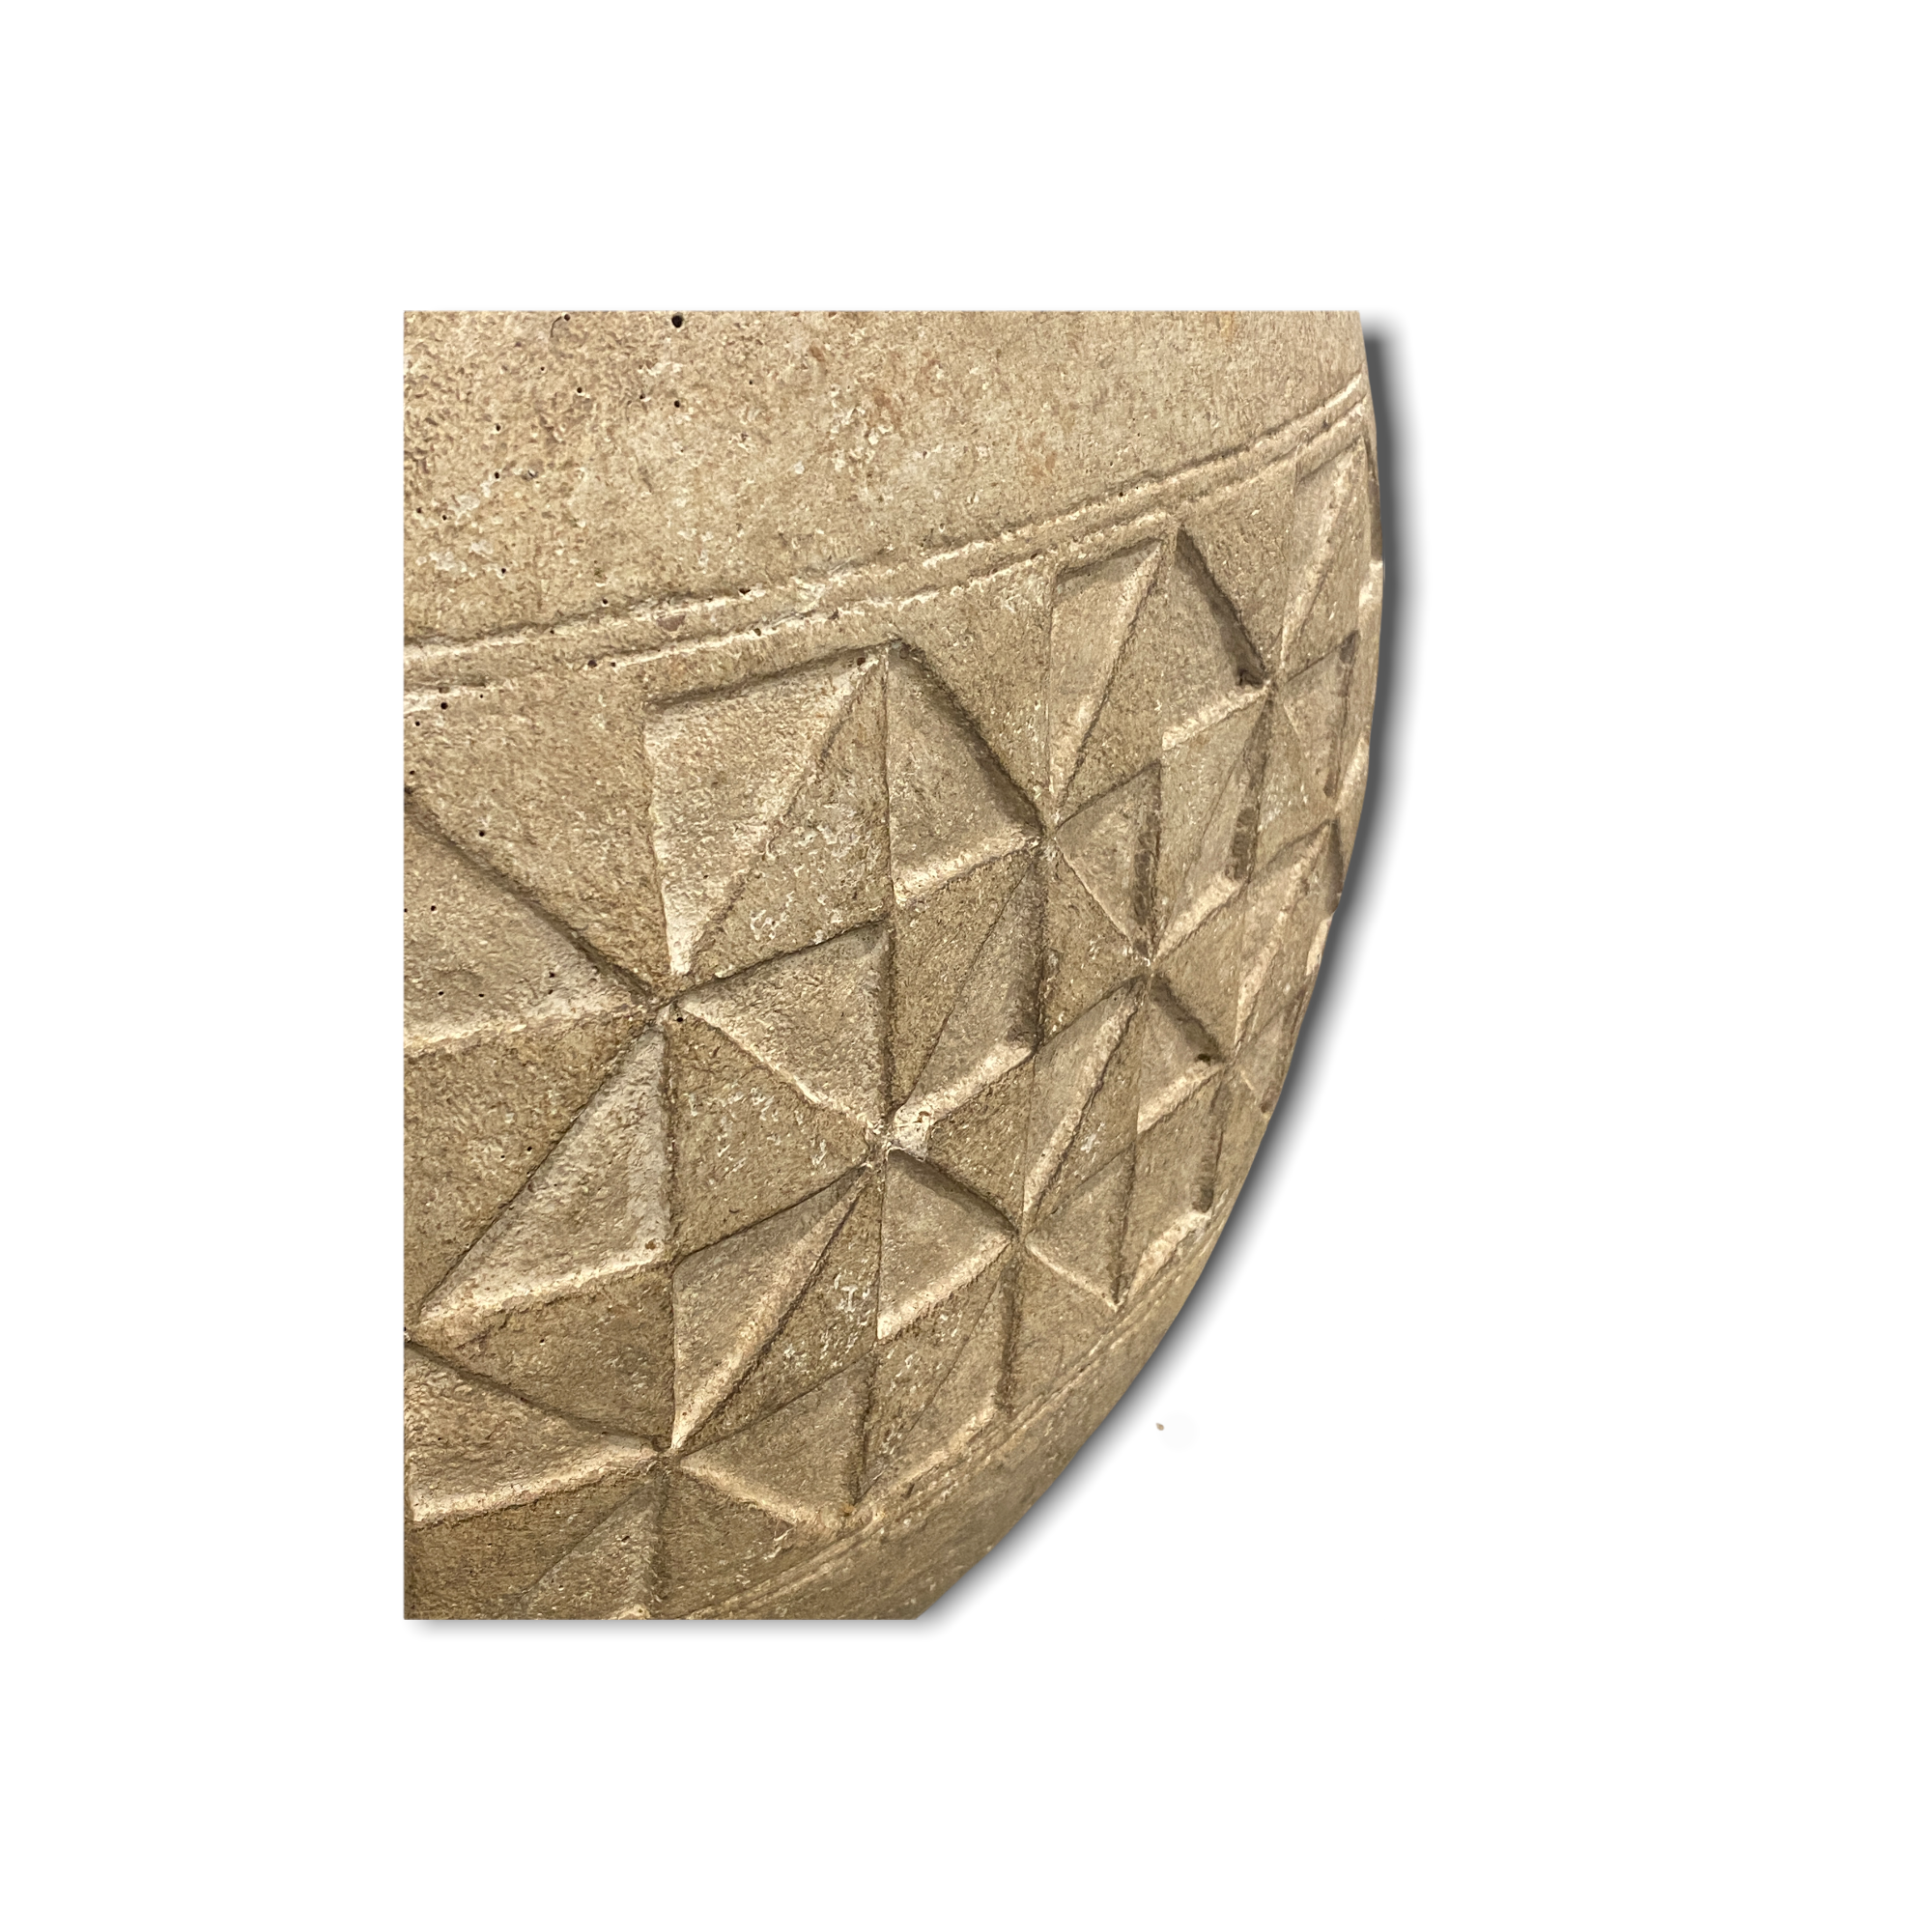 Cameroon Shield - Triangle engraving (CWCm1)